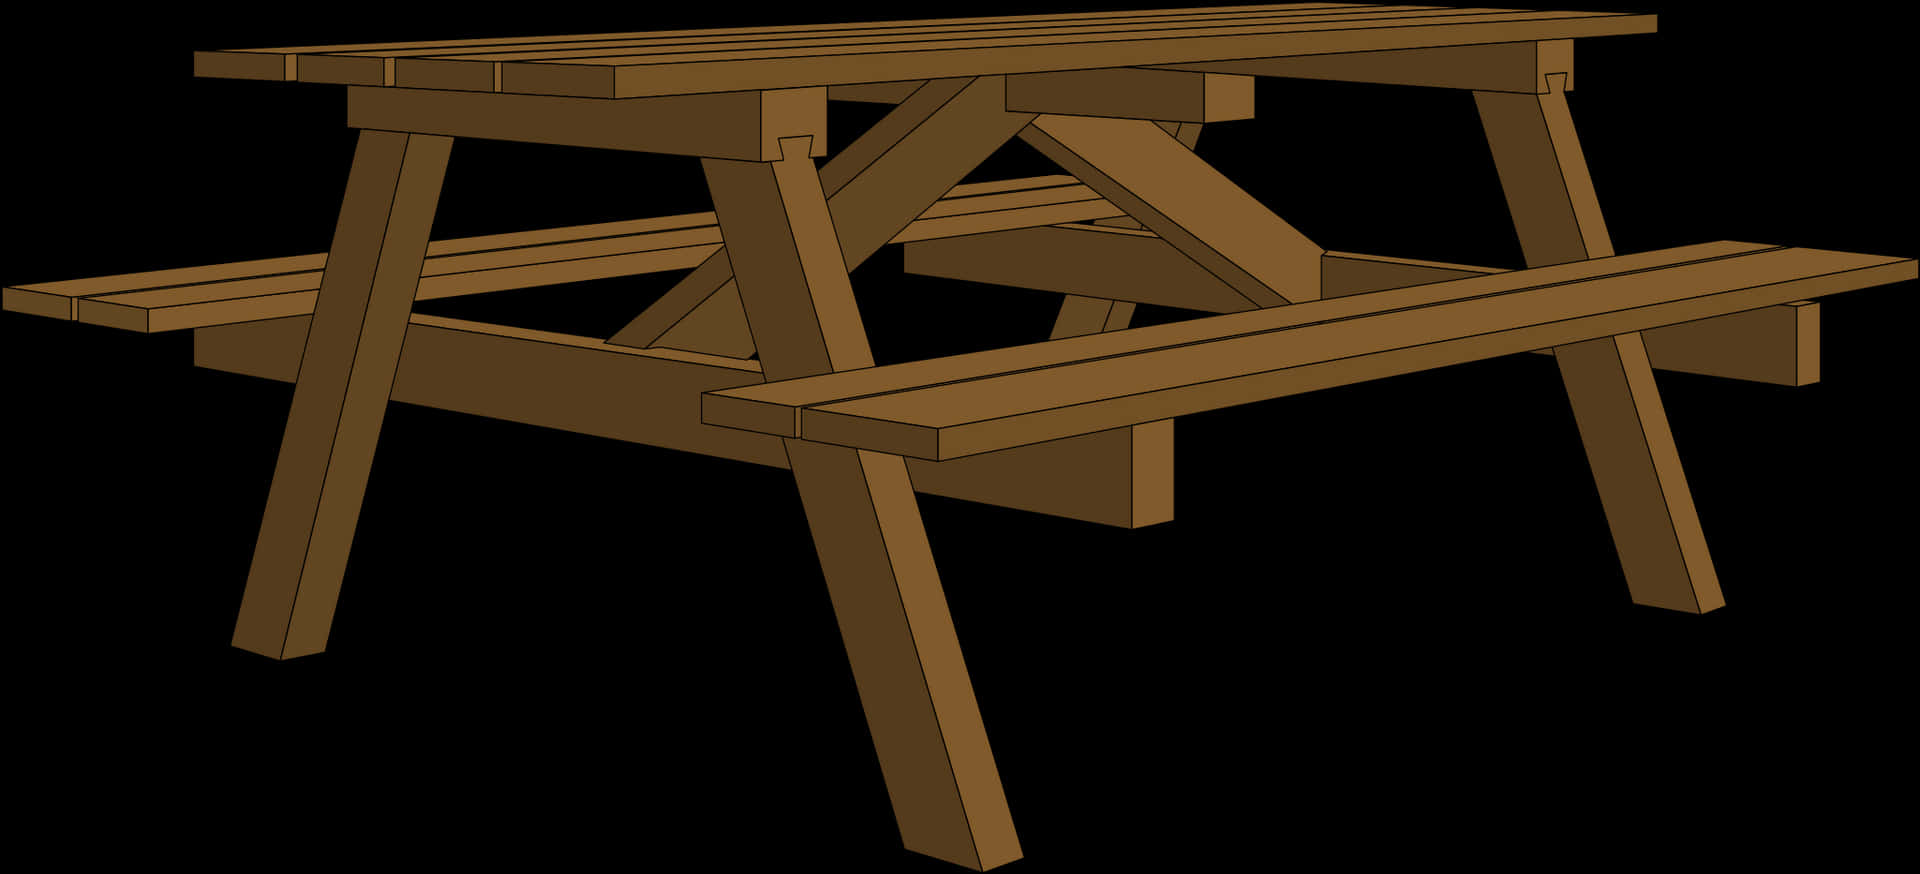 Wooden Picnic Table Vector Illustration PNG